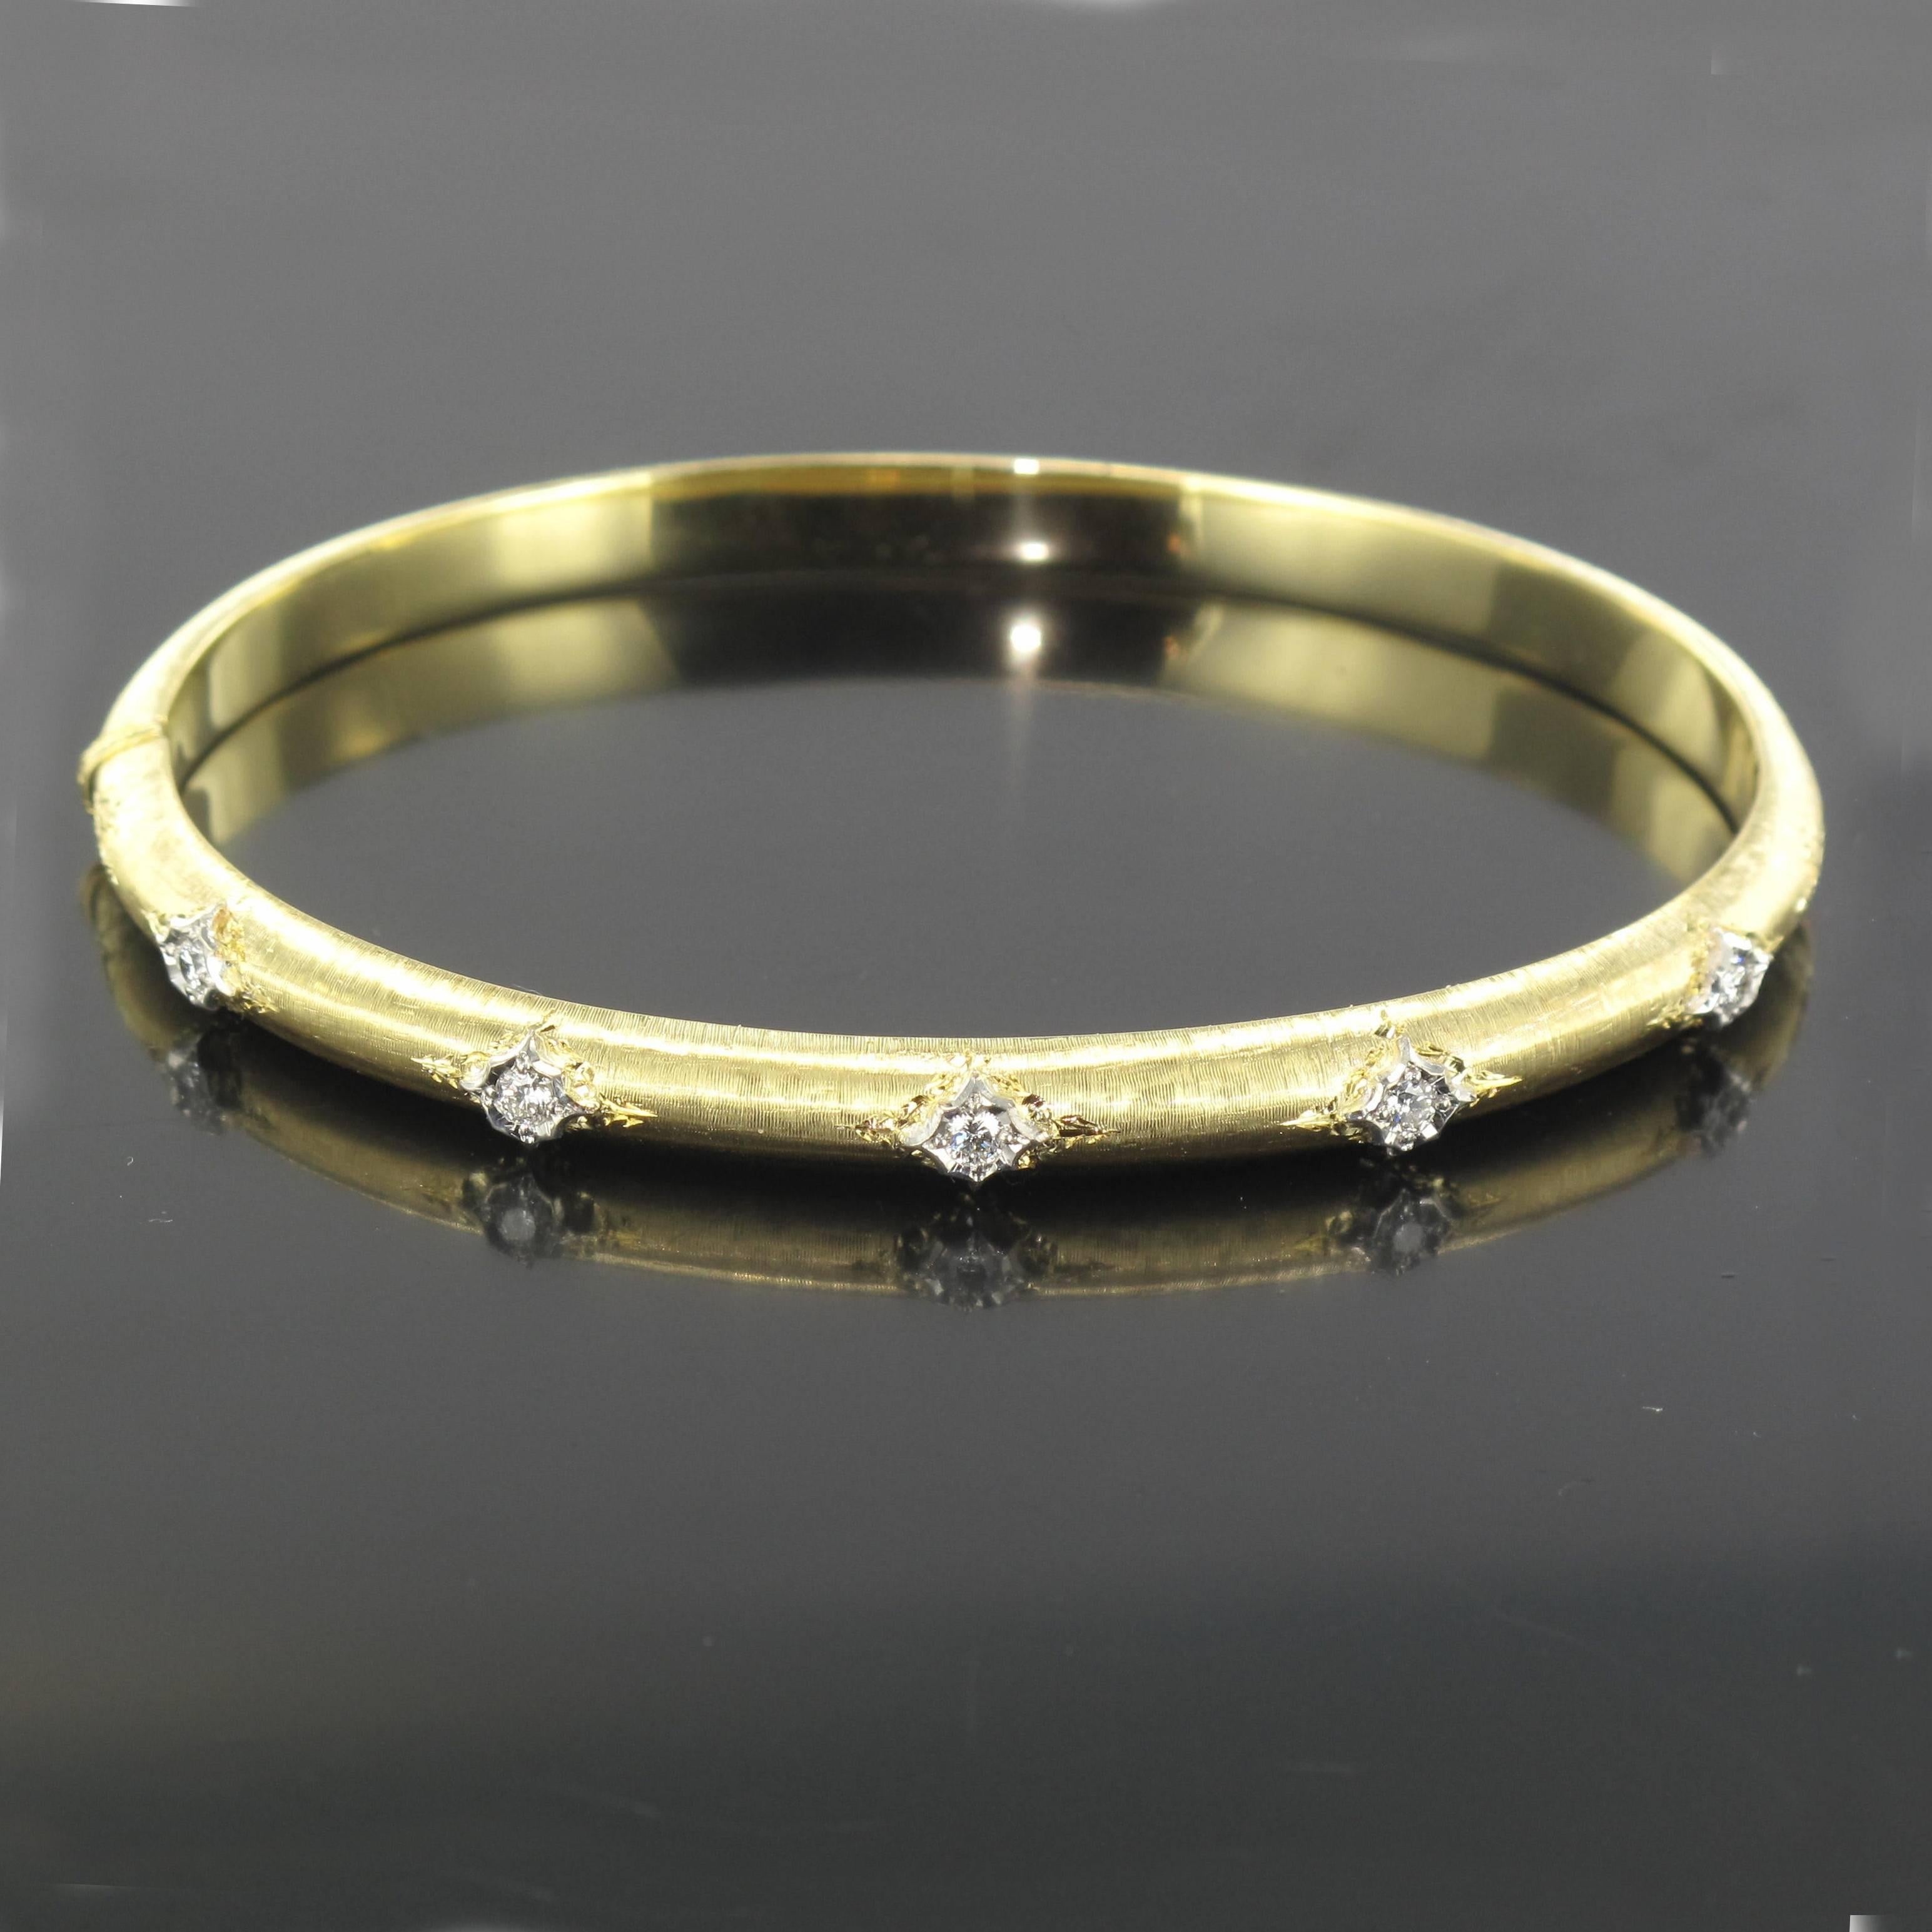 Bangle bracelet in 18 carat satin yellow gold.
This lovely oval and rounded bracelet is made from brushed yellow gold that is engraved and set with 5 brilliant cut diamonds. This diamond bracelet opens with a hinge. 
Total diamond weight: about 0.20